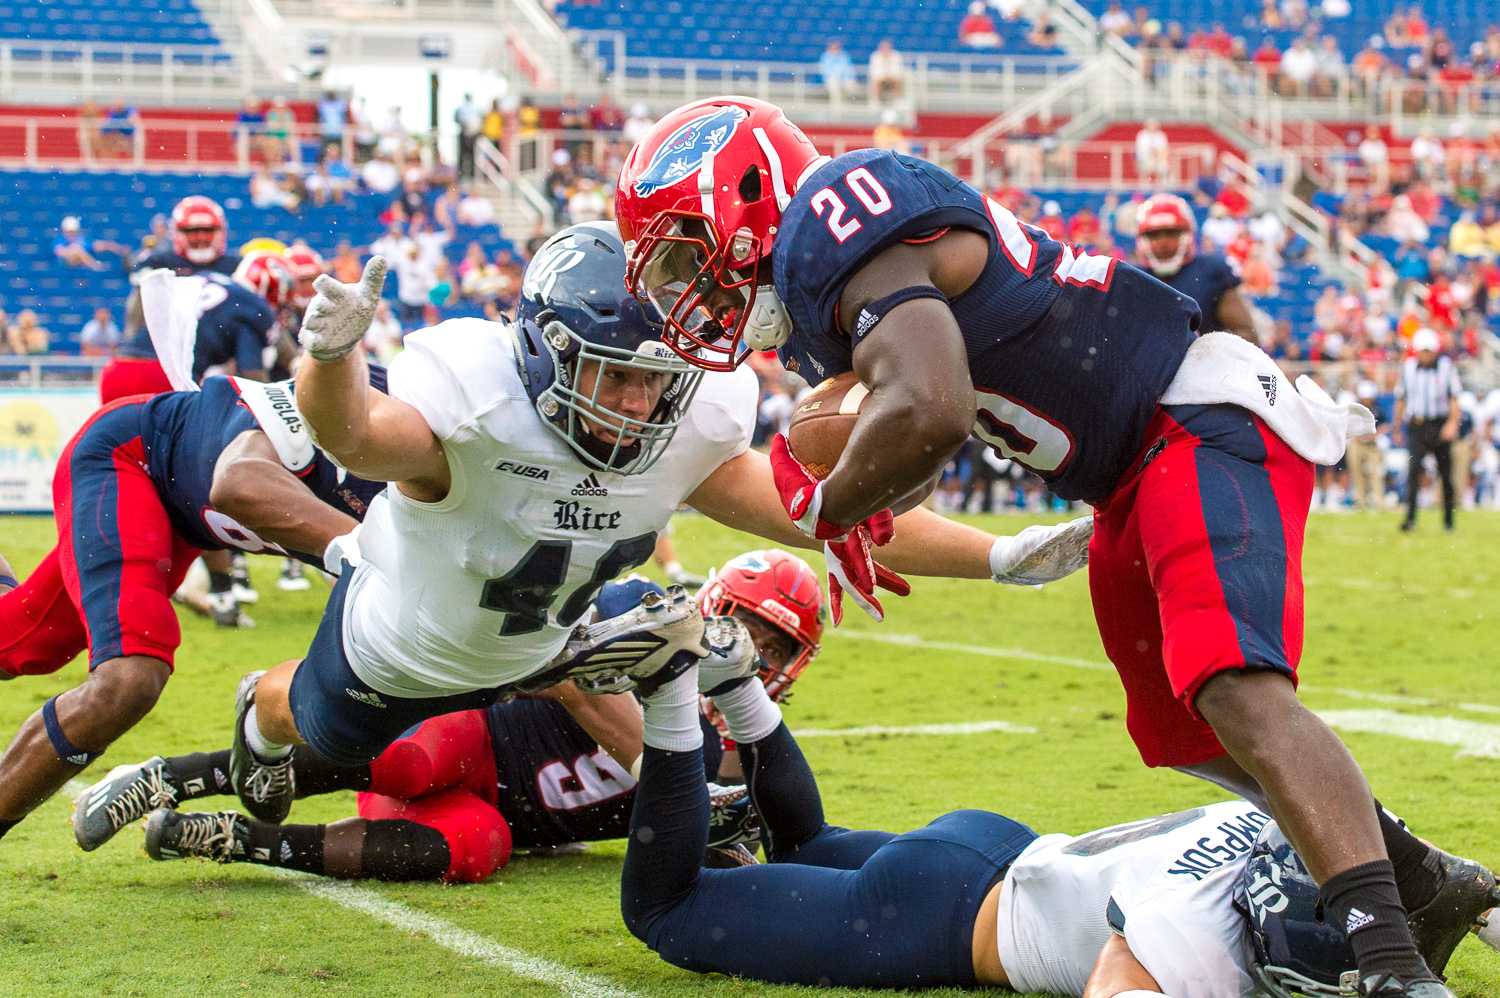 FAU running back Marcus Clark (20) steps out of bounds before being tackled by Rice defensive end Brady White (40). Clark had three carries for a total of 48 yards on the day. Max Jackson | Staff Photographer 